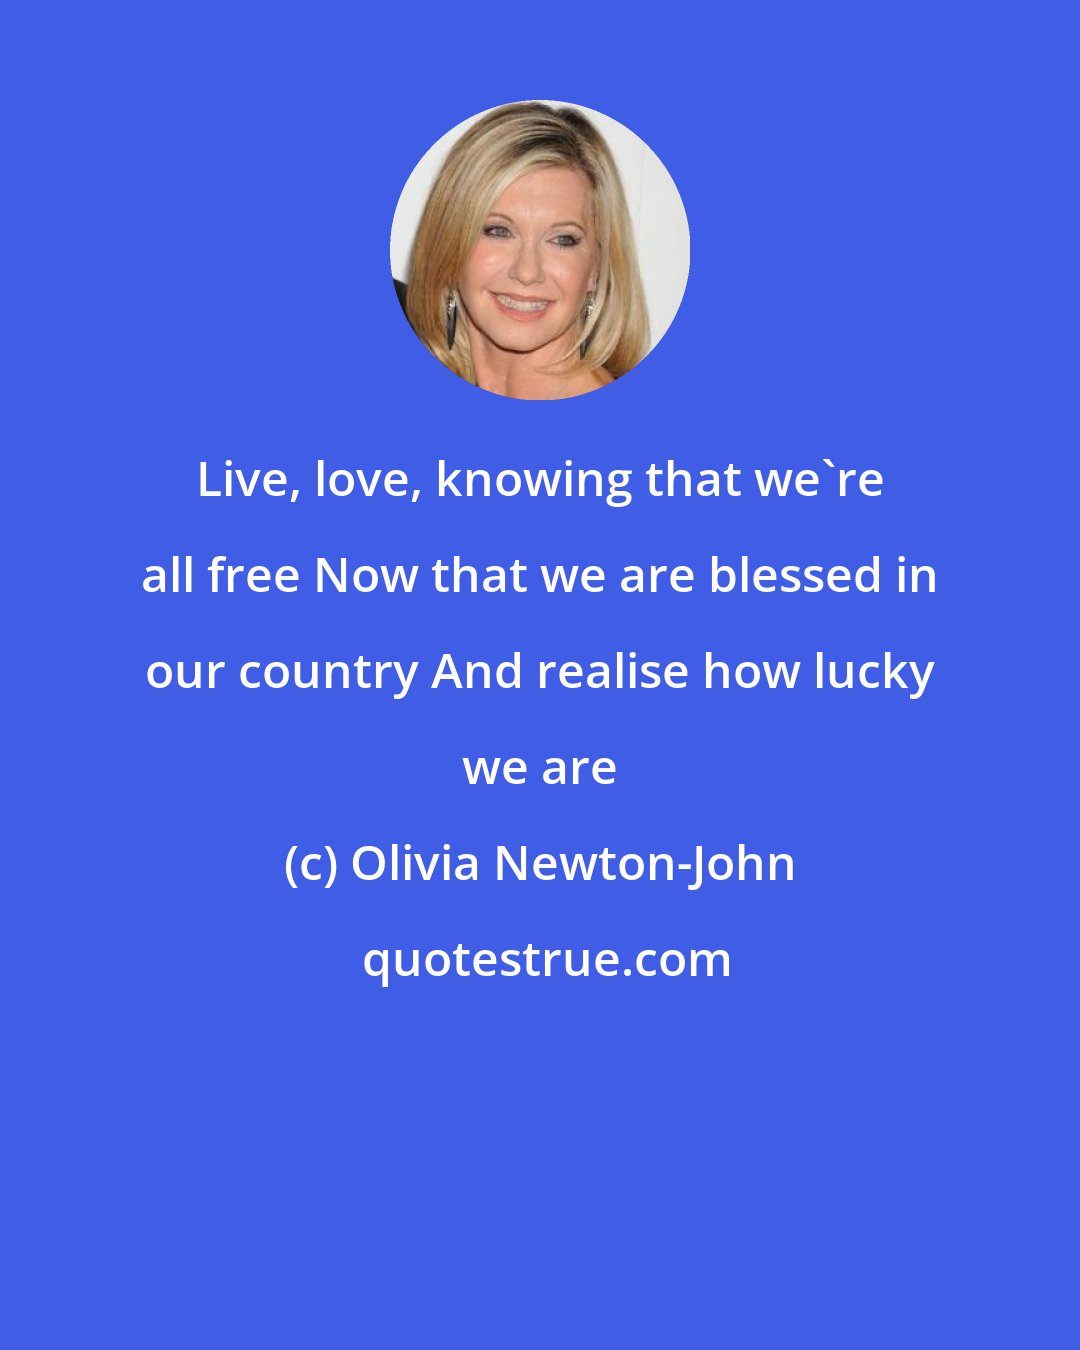 Olivia Newton-John: Live, love, knowing that we're all free Now that we are blessed in our country And realise how lucky we are